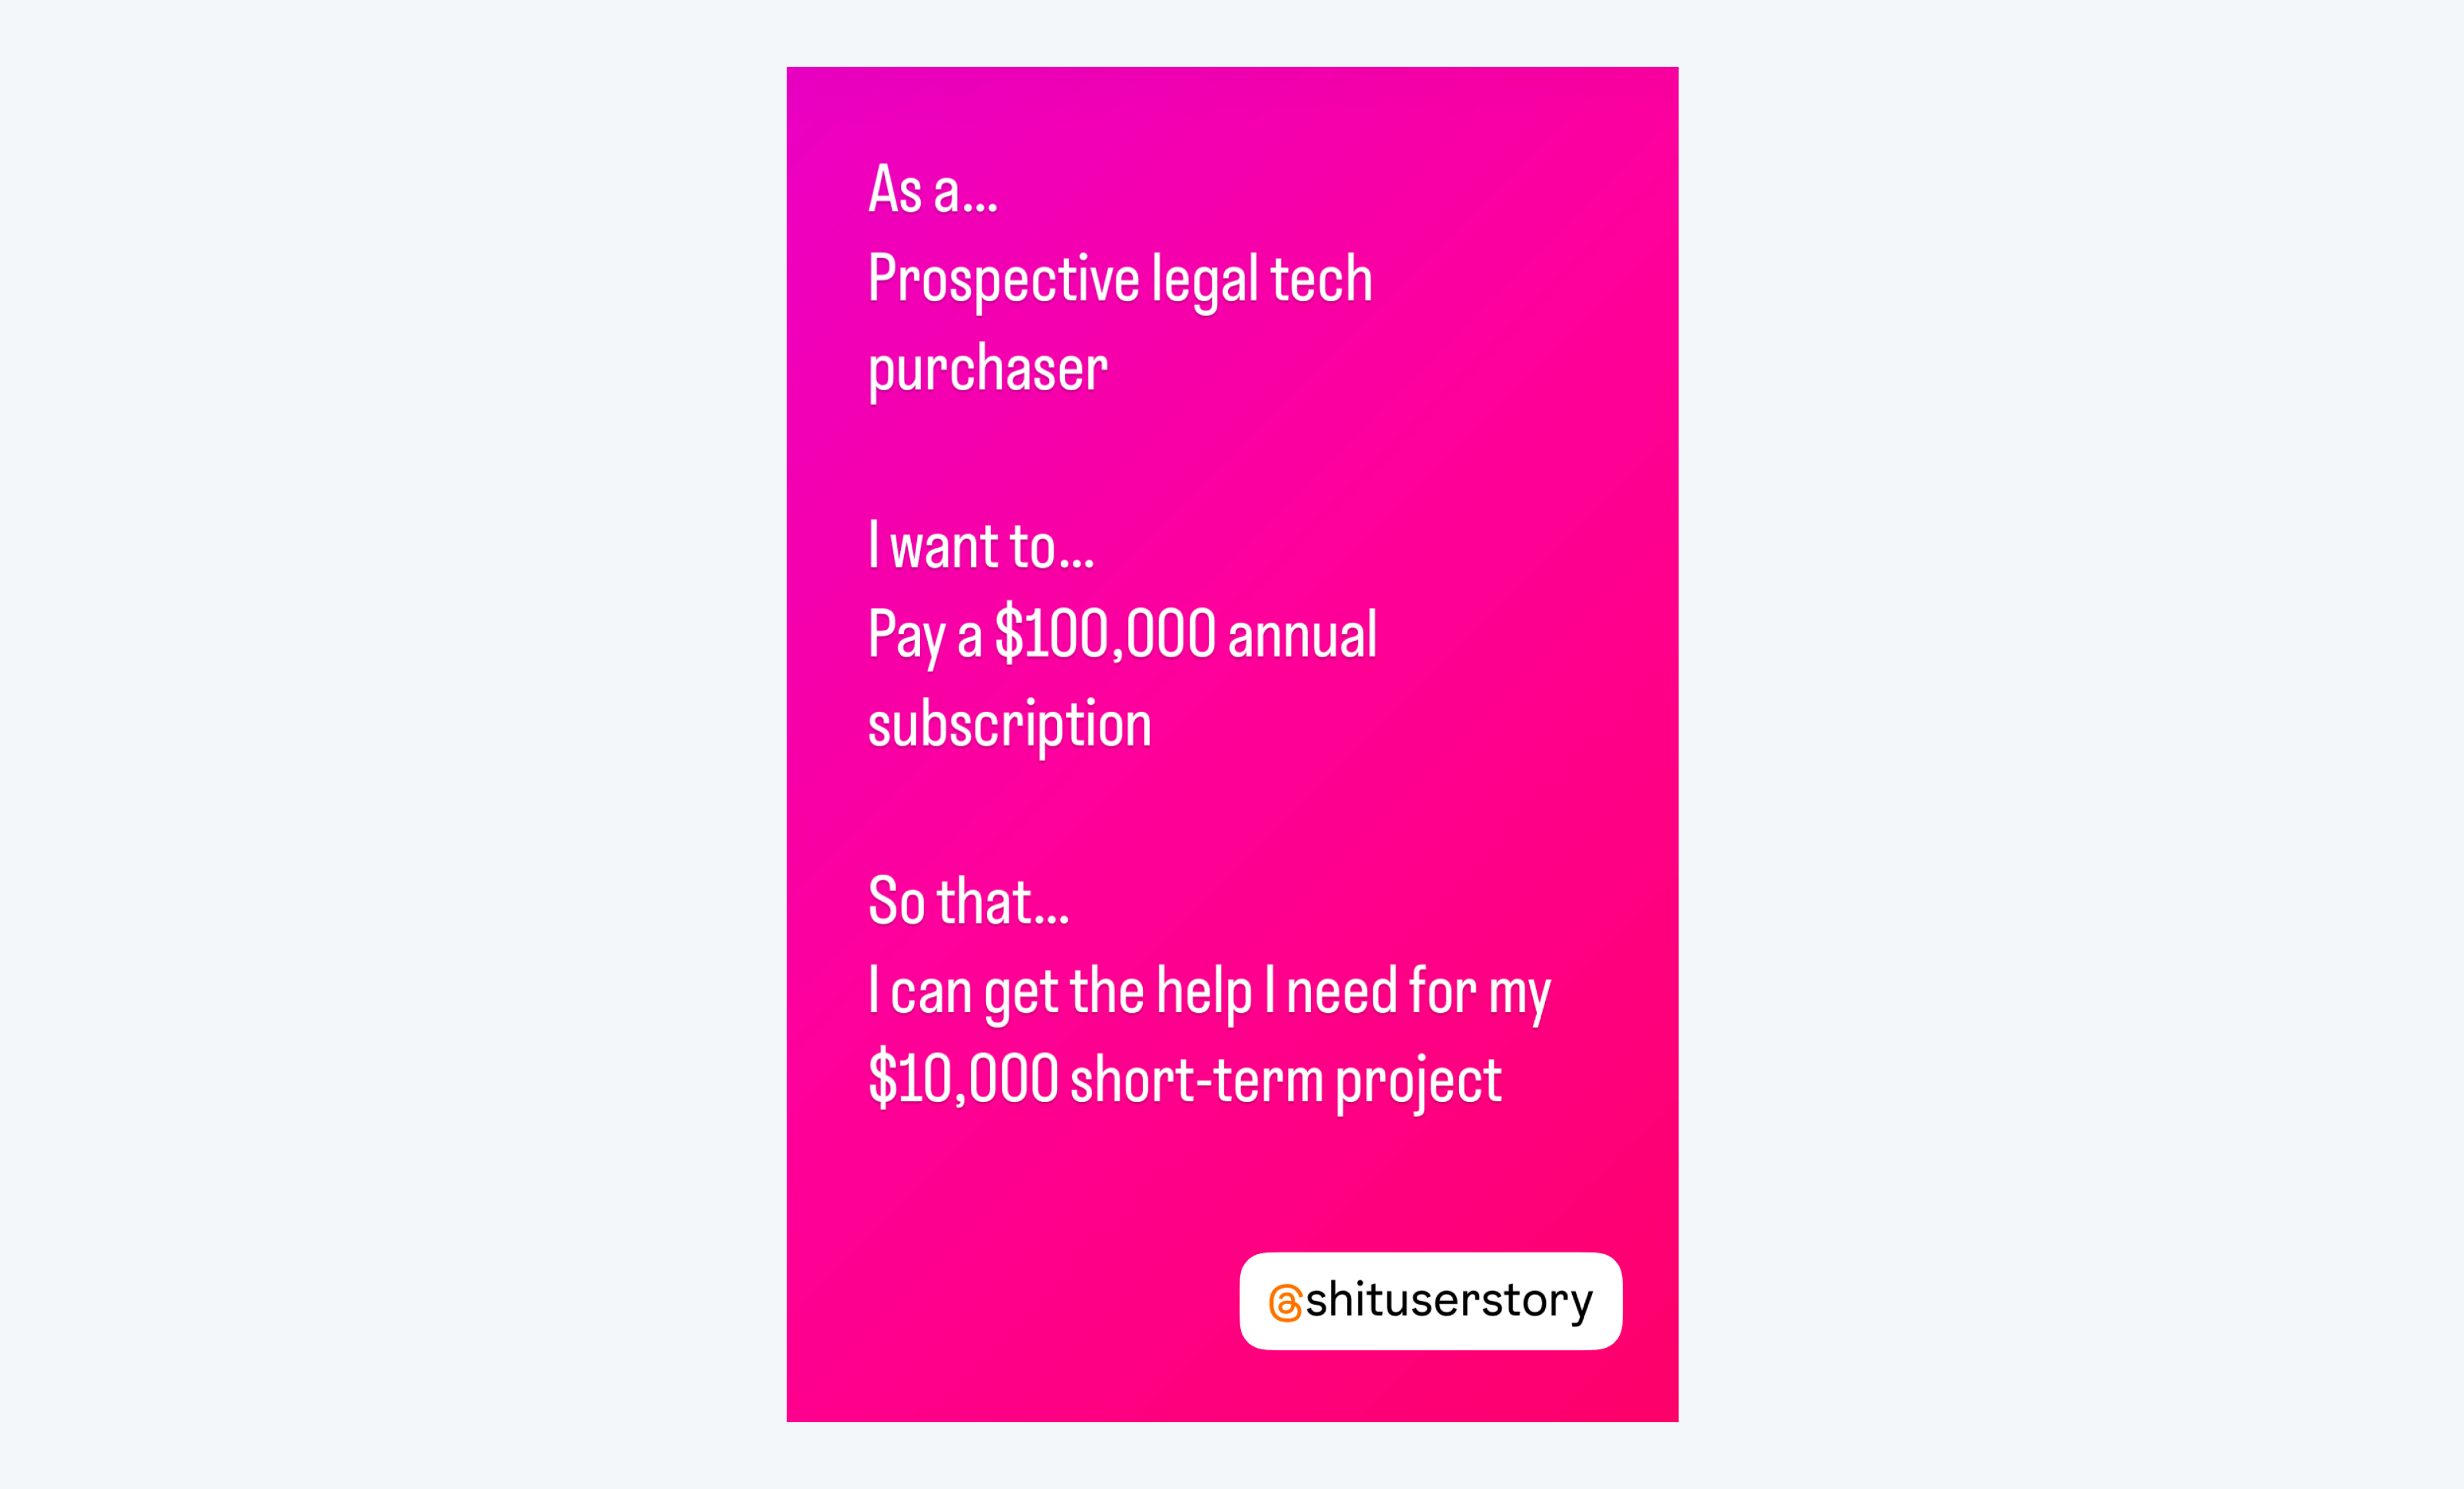 Screenshot made up shit user story: As a... Prospective legal tech purchaser, I want to...Pay a $100,000 annual subscription, So that... I can get help with my $10,000 short term project